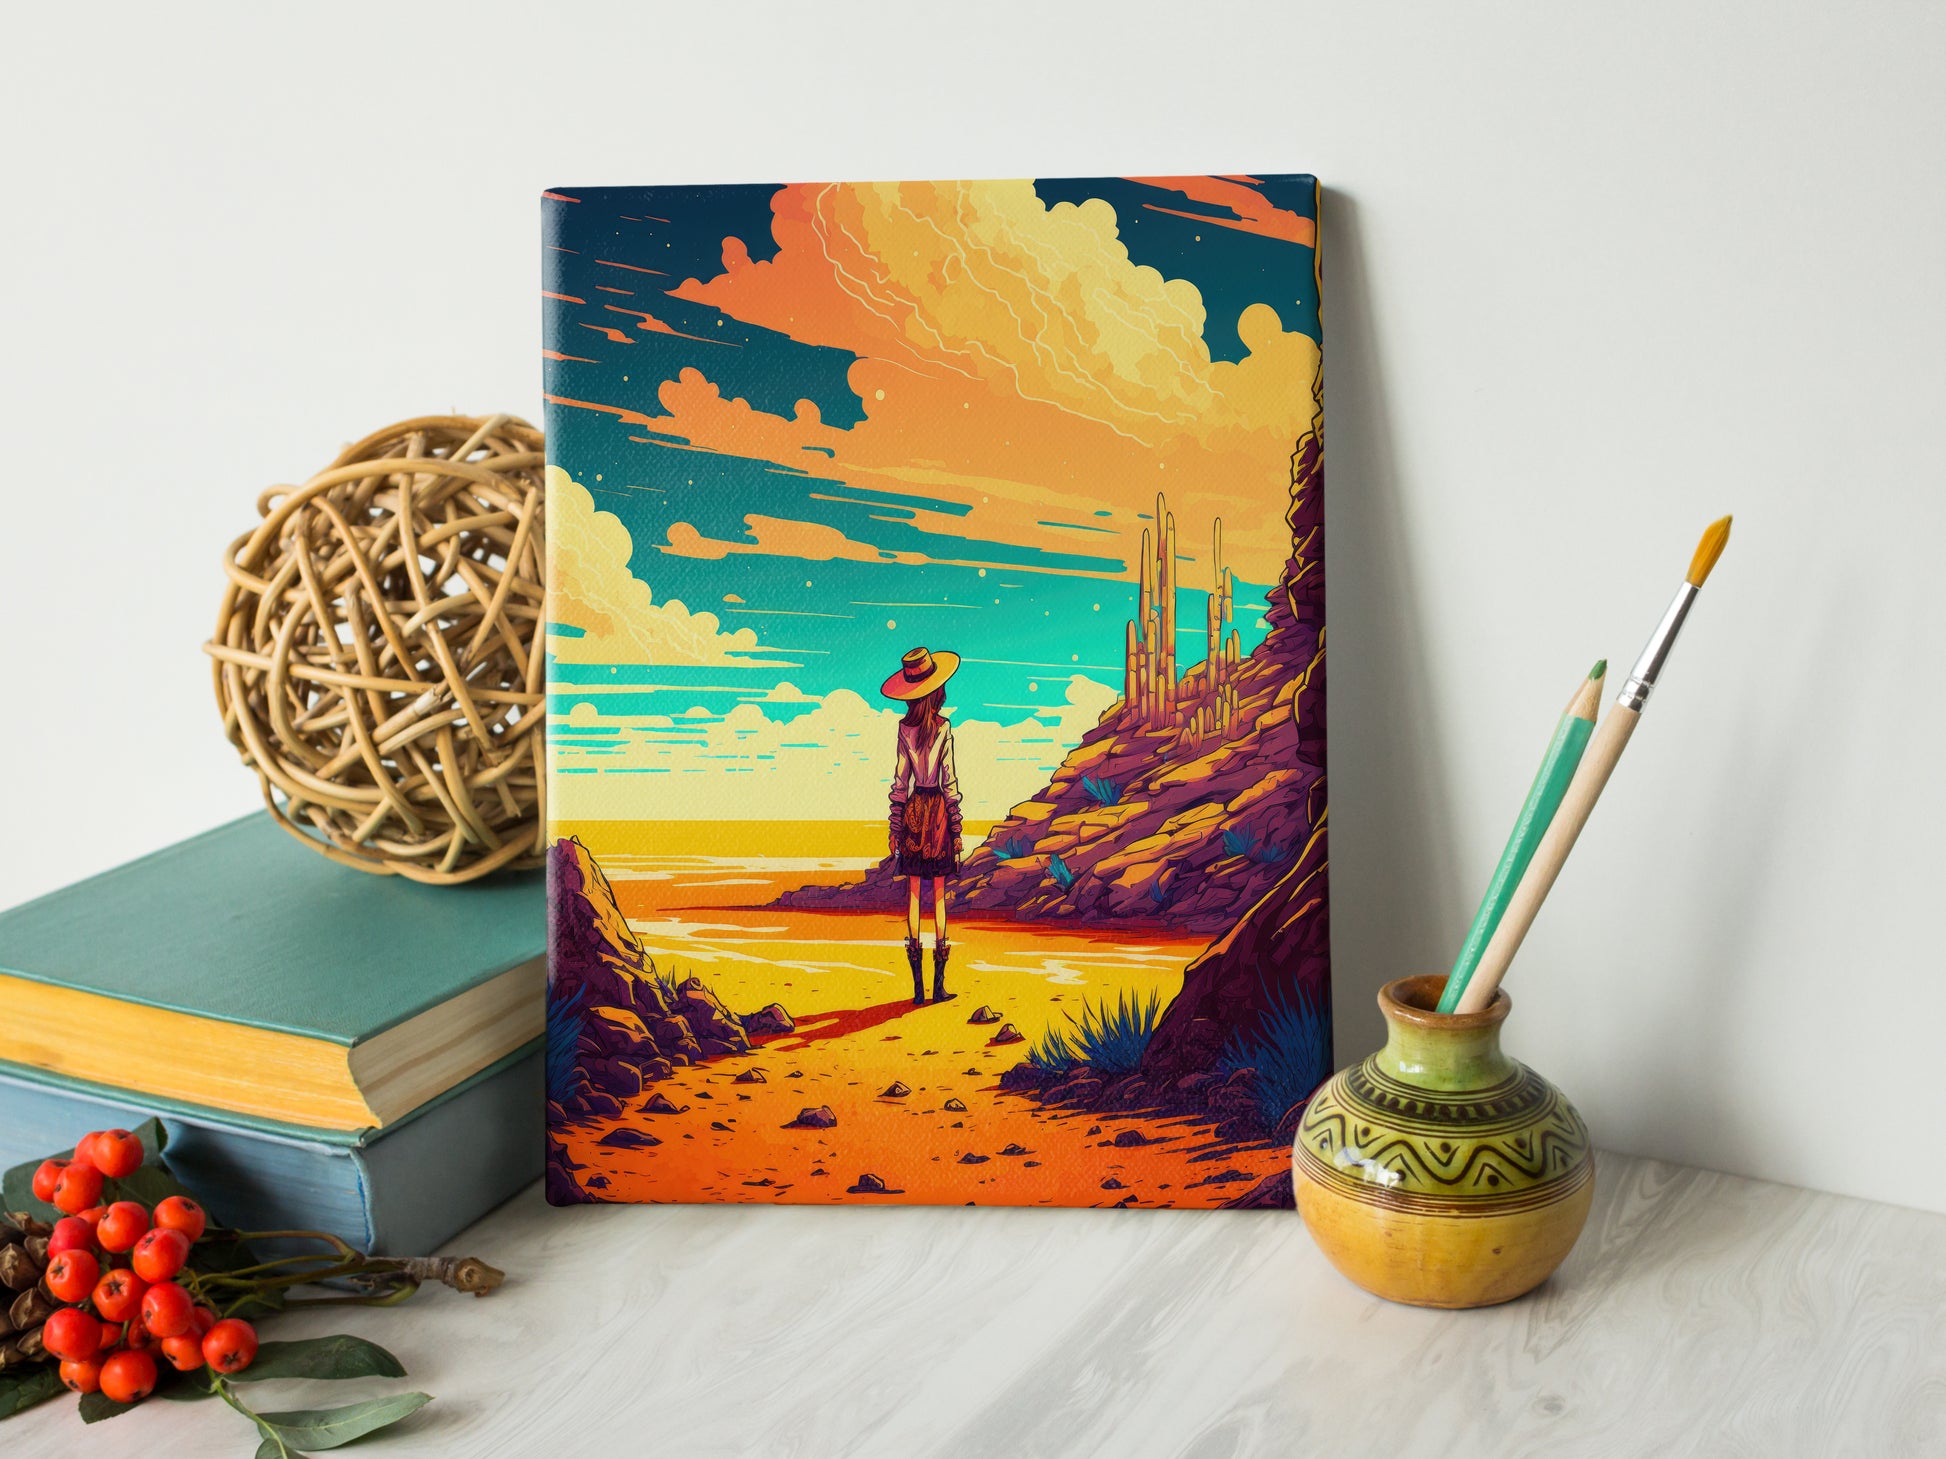 How Custom Canvas Prints Are Stretched In An Art Shop